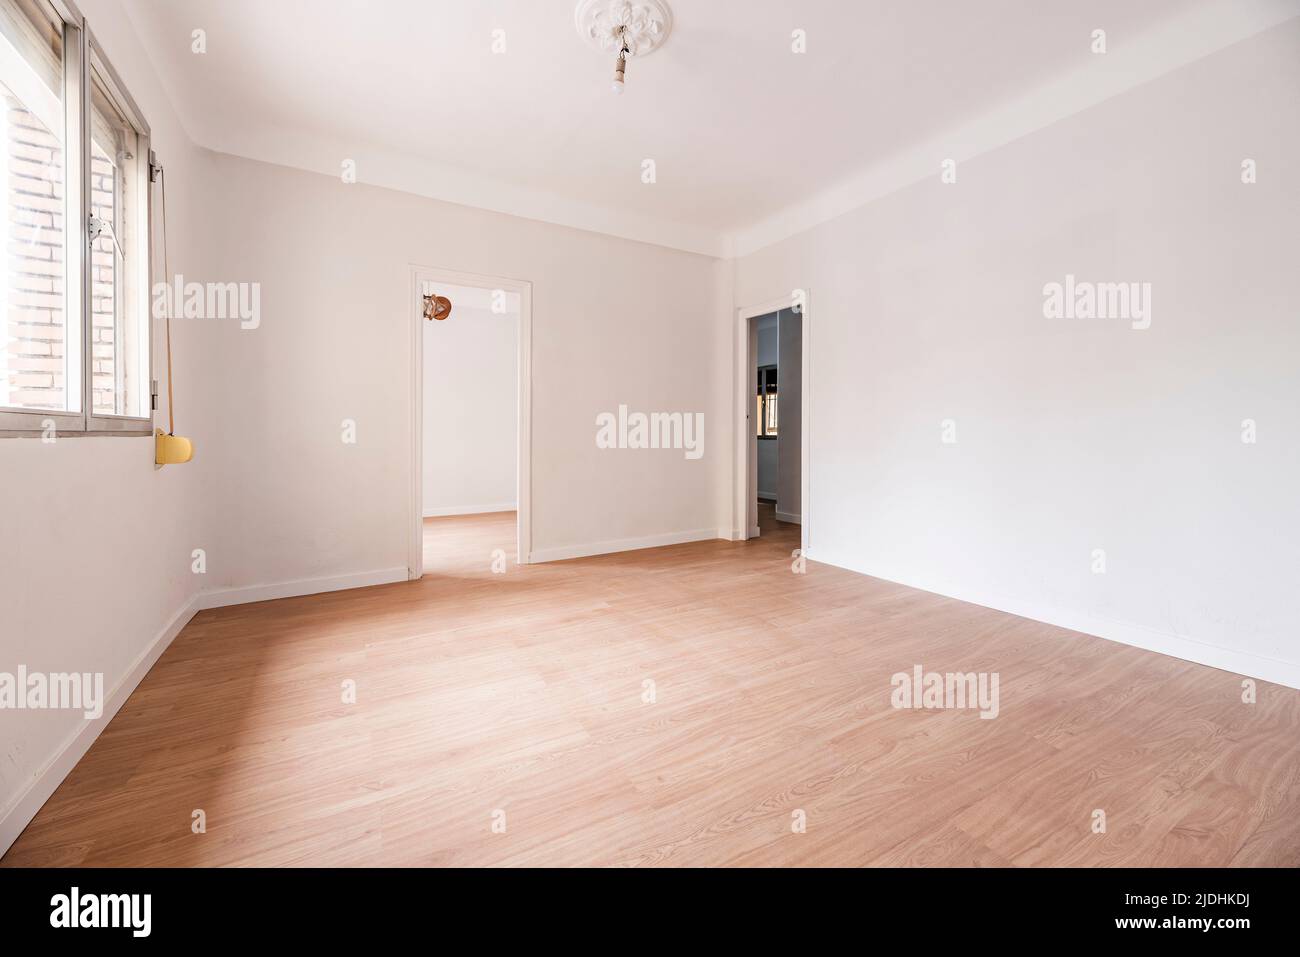 Empty room with oak parquet floor, white painted walls and white woodwork and plaster moldings on the ceiling Stock Photo